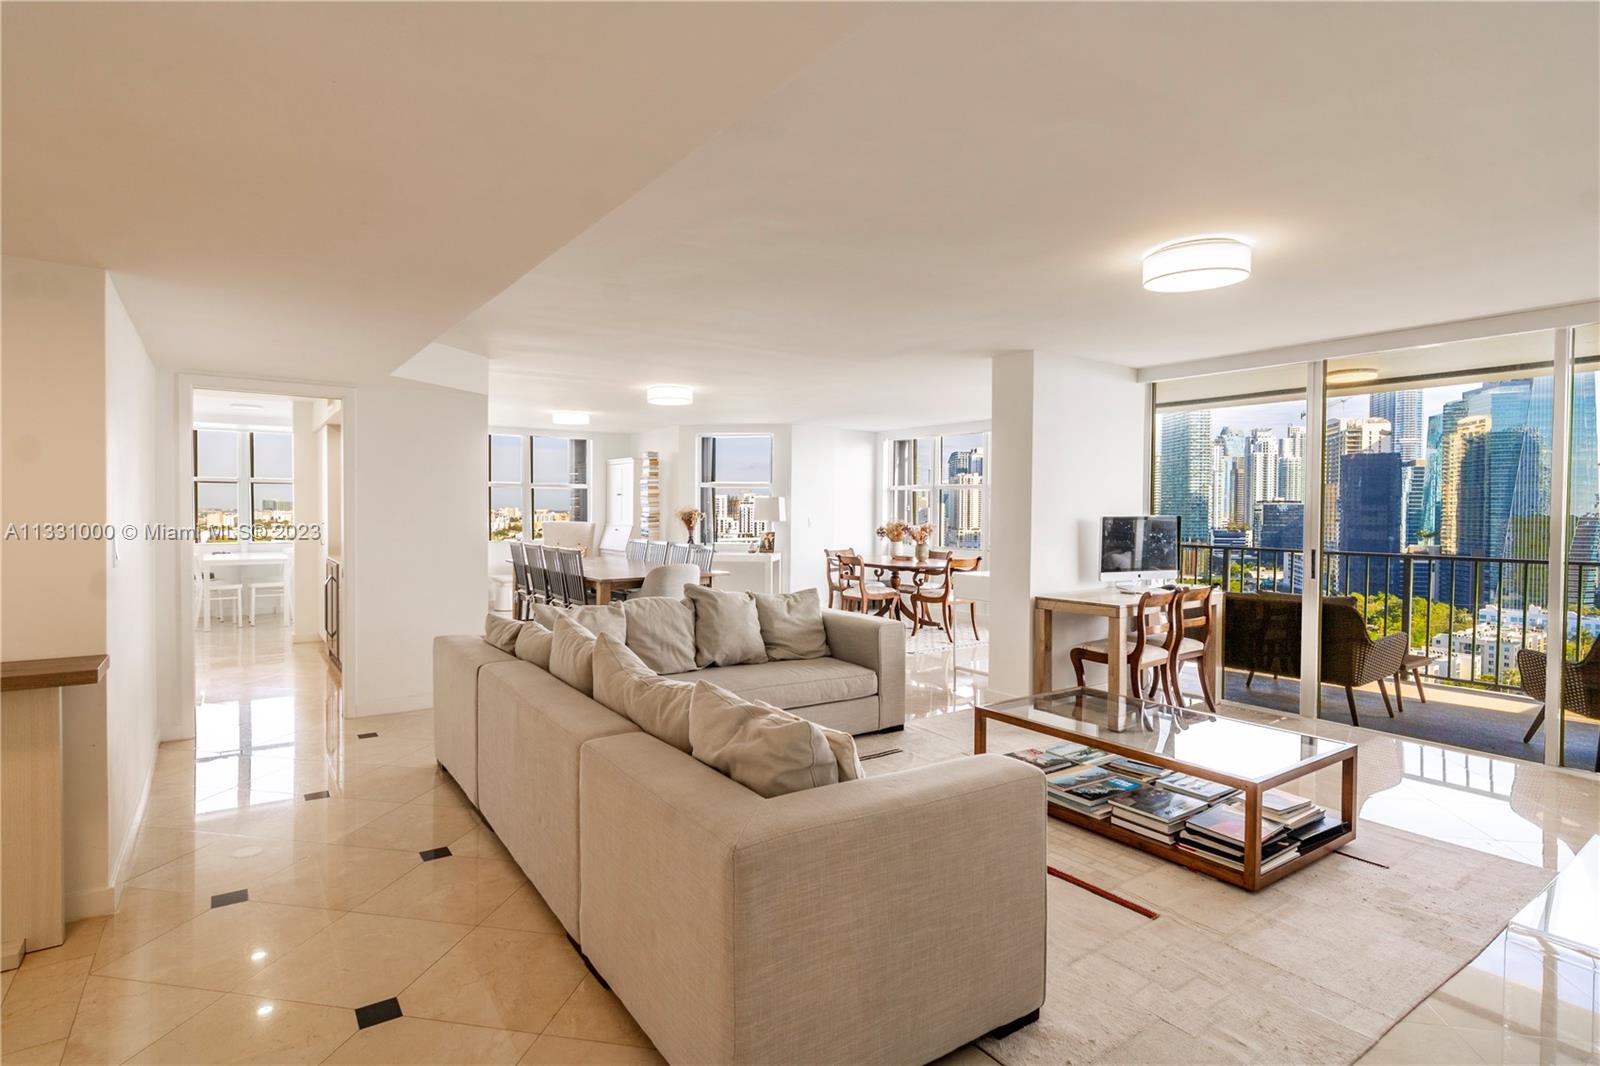 Stunning oversized 4 bedroom home in the sky, with panoramic views of the Biscayne Bay and Brickell skyline. This spacious and fully renovated apartment, located in the most prestigious area of Brickell, is a rare finding in Brickell, due to its unique floor-plan, generous living areas and incredible amenities within the famous Brickell Place condominium. Tastefully finished and upgraded, this home in the sky is move in ready and is ideal for large families, who love to entertain without compromising their privacy within the almost 3,200 square feet of interior living space. Brickell Place condominium offers a very private and secure environment, integrated with great amenities such as, swimming pool, tennis and racket ball courts, marina and much more. Unique Opportunity that wont last!